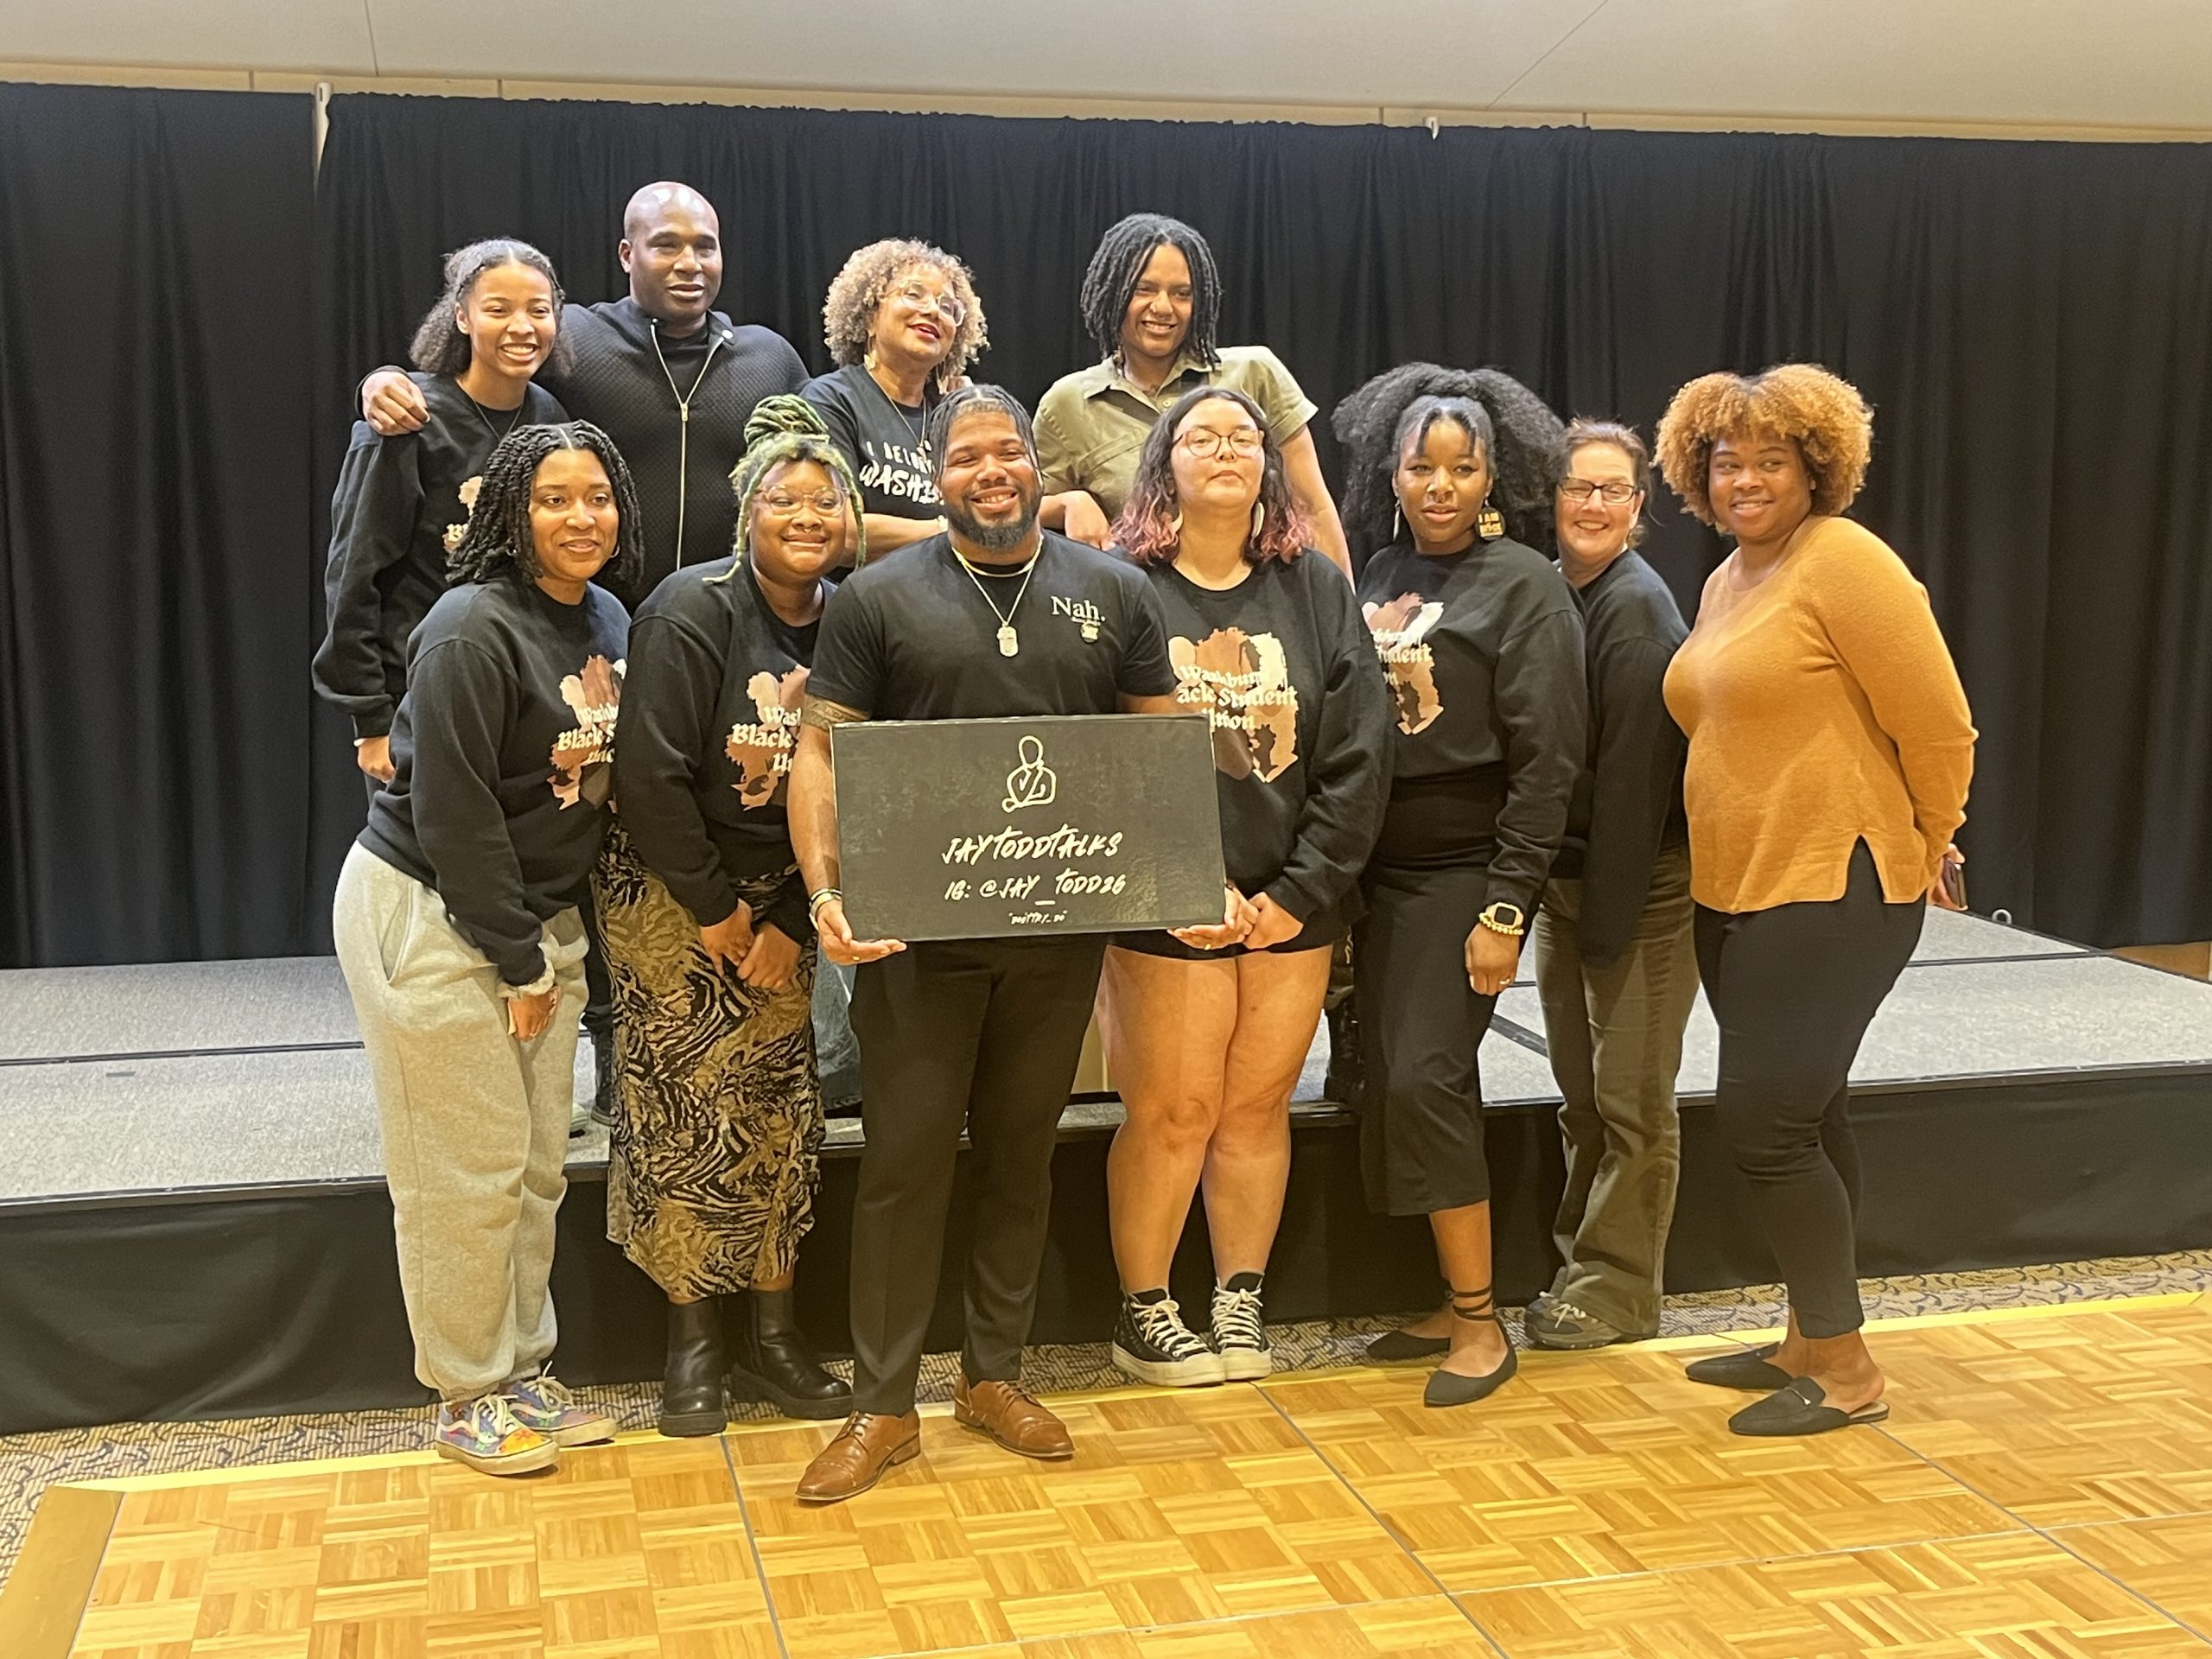 Members of the Washburn Black Student Union pose with guest speaker Jay Todd. Jay Todd is a life coach, DEI educator, mental health advocate and public speaker who was the keynote speaker during a banquet hosted by WSBU Feb 8.